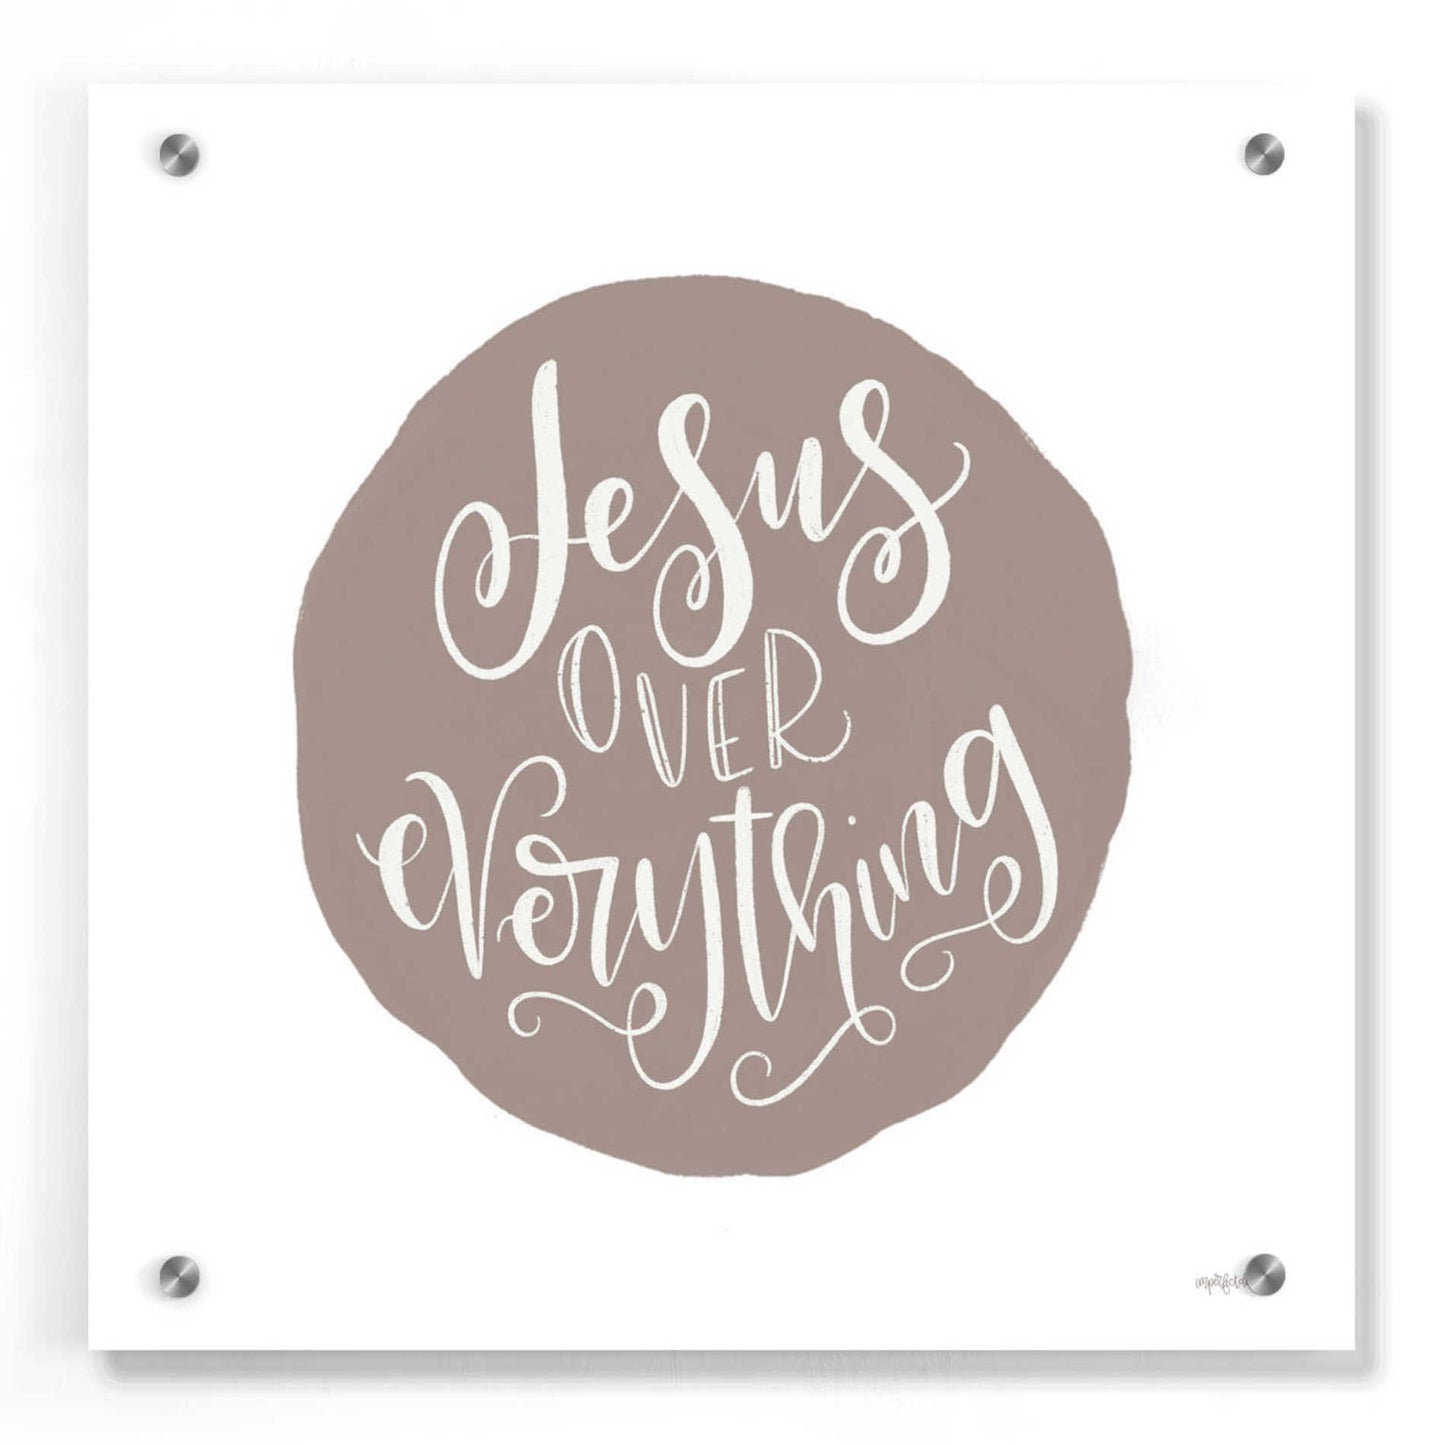 Epic Art 'Jesus Over Everything' by Imperfect Dust, Acrylic Glass Wall Art,36x36